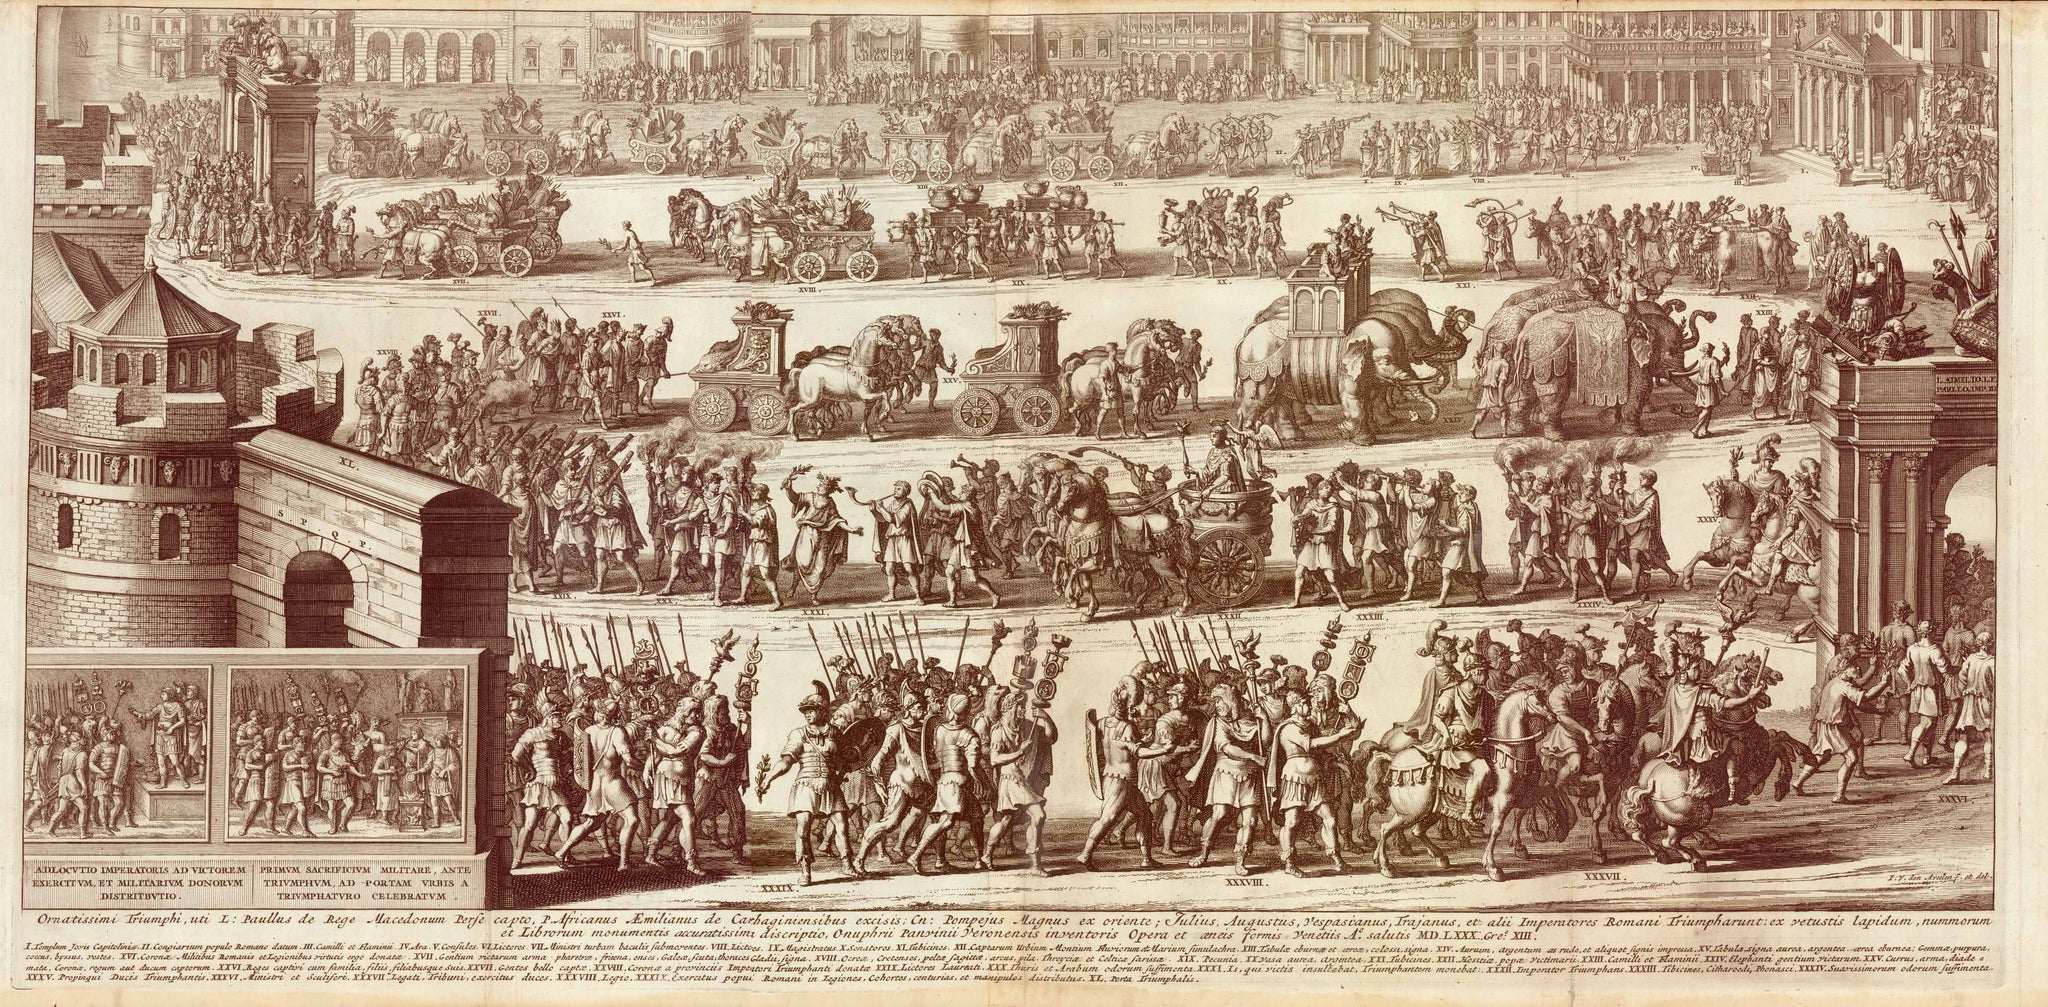 "Ornatissimi Triumphié"  Copper etching by Johan van den Aveele(n) (1650-1727) The artist used several slightly different spellings of his name)  This etching is based upon Onofrio Panvinio (1530-1568), who published "Fasti et triumph Roamnorum" in the year 1557.